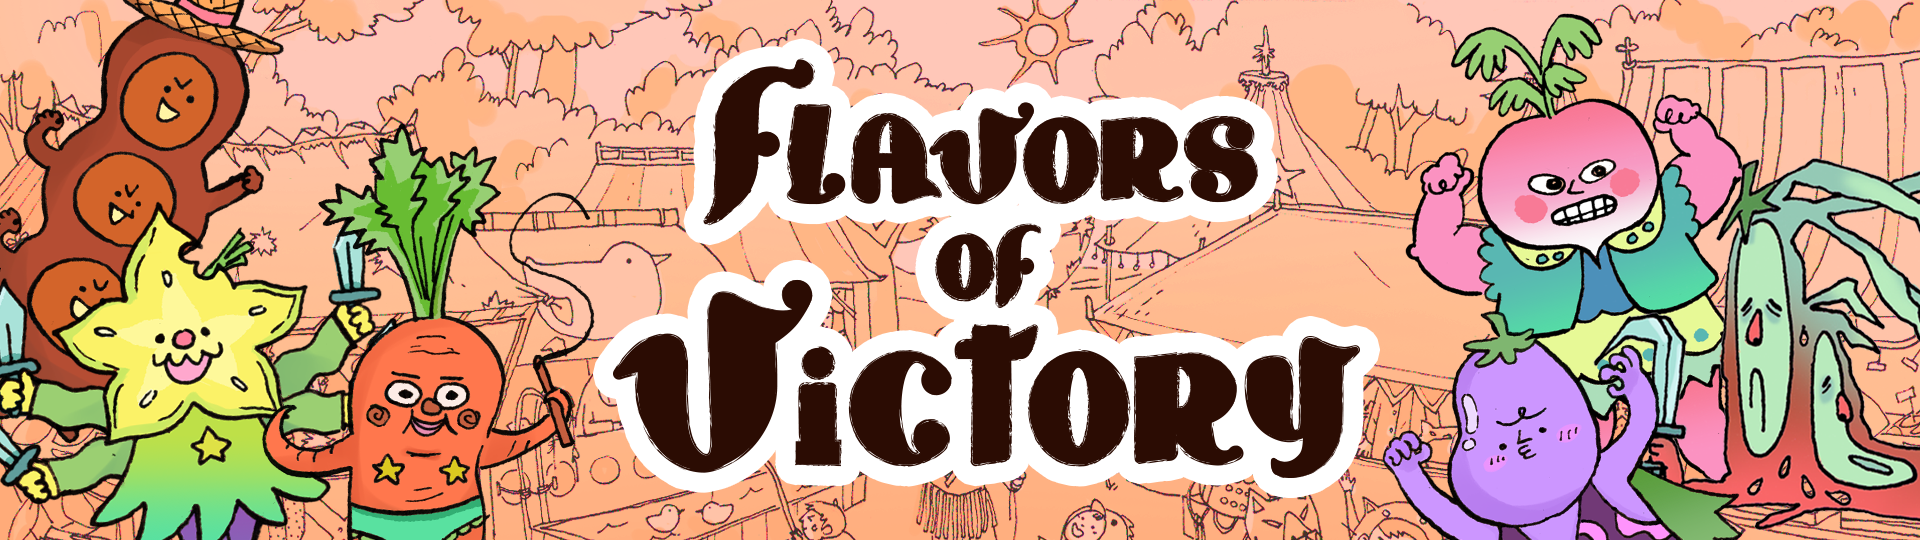 Flavors of Victory